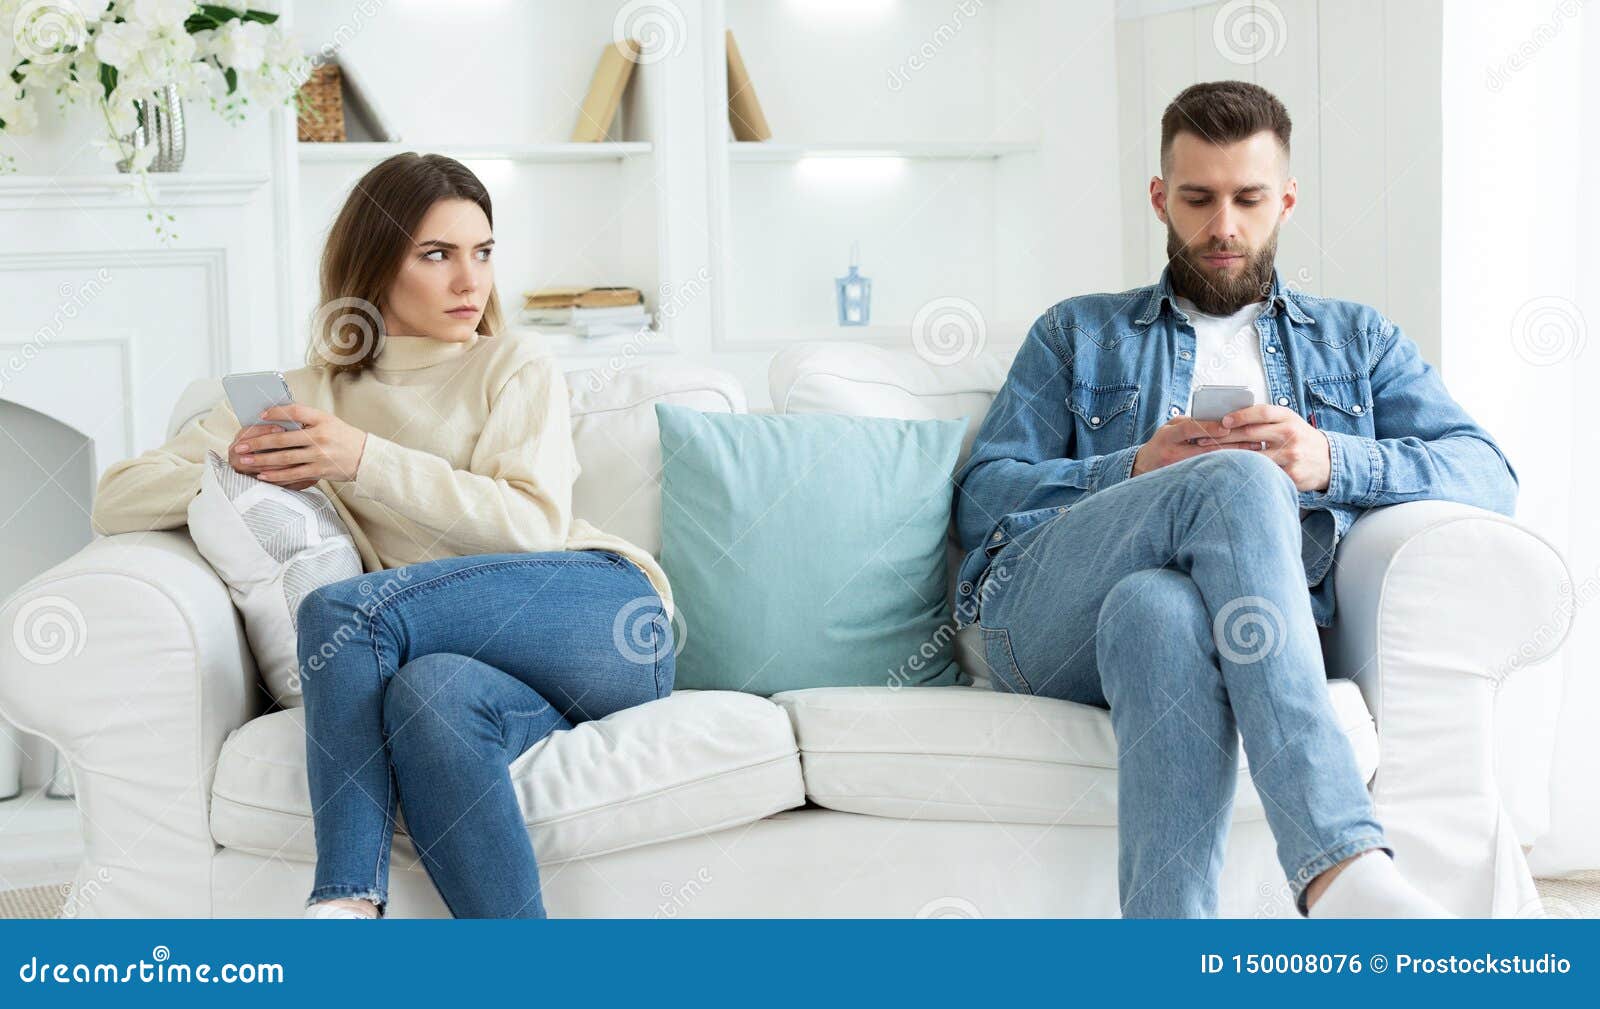 Stock Photo Not Paying Attention